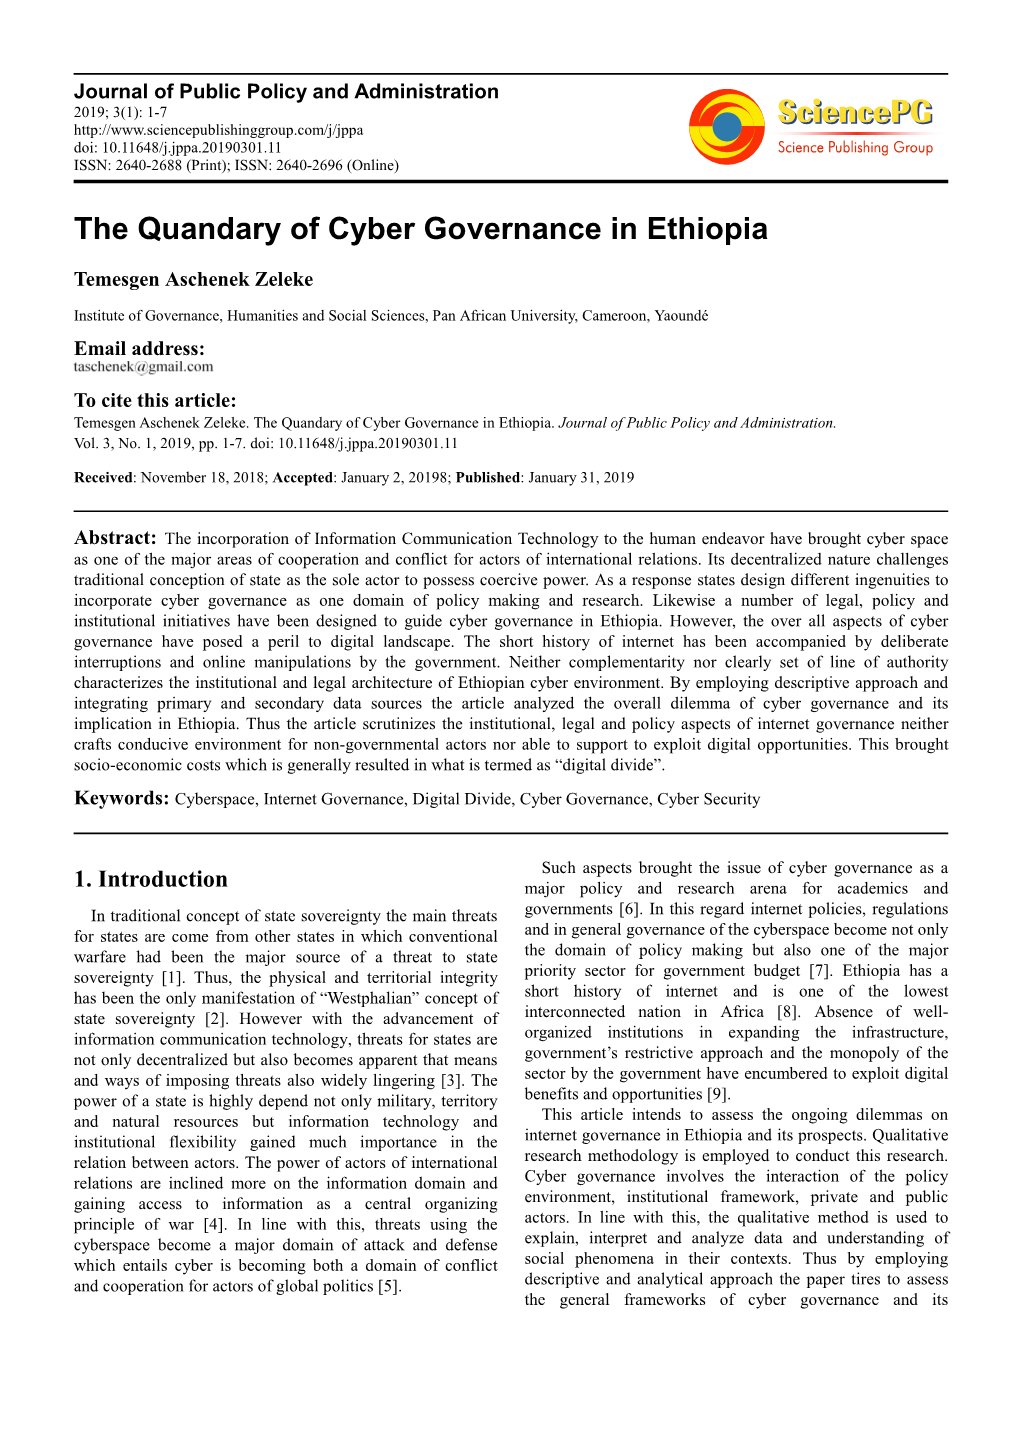 The Quandary of Cyber Governance in Ethiopia